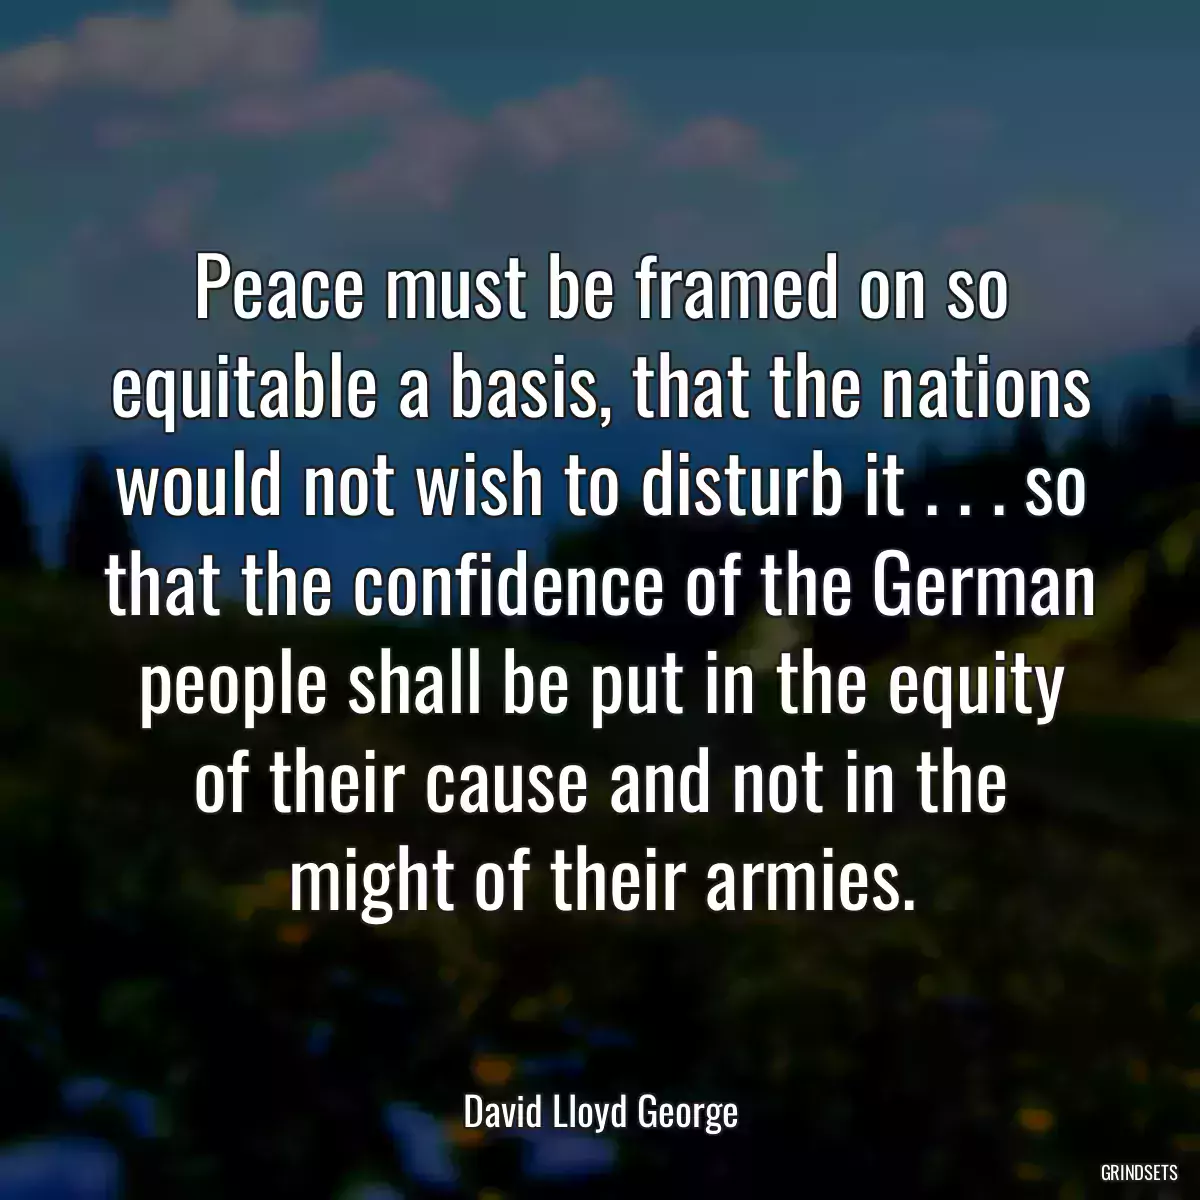 Peace must be framed on so equitable a basis, that the nations would not wish to disturb it . . . so that the confidence of the German people shall be put in the equity of their cause and not in the might of their armies.